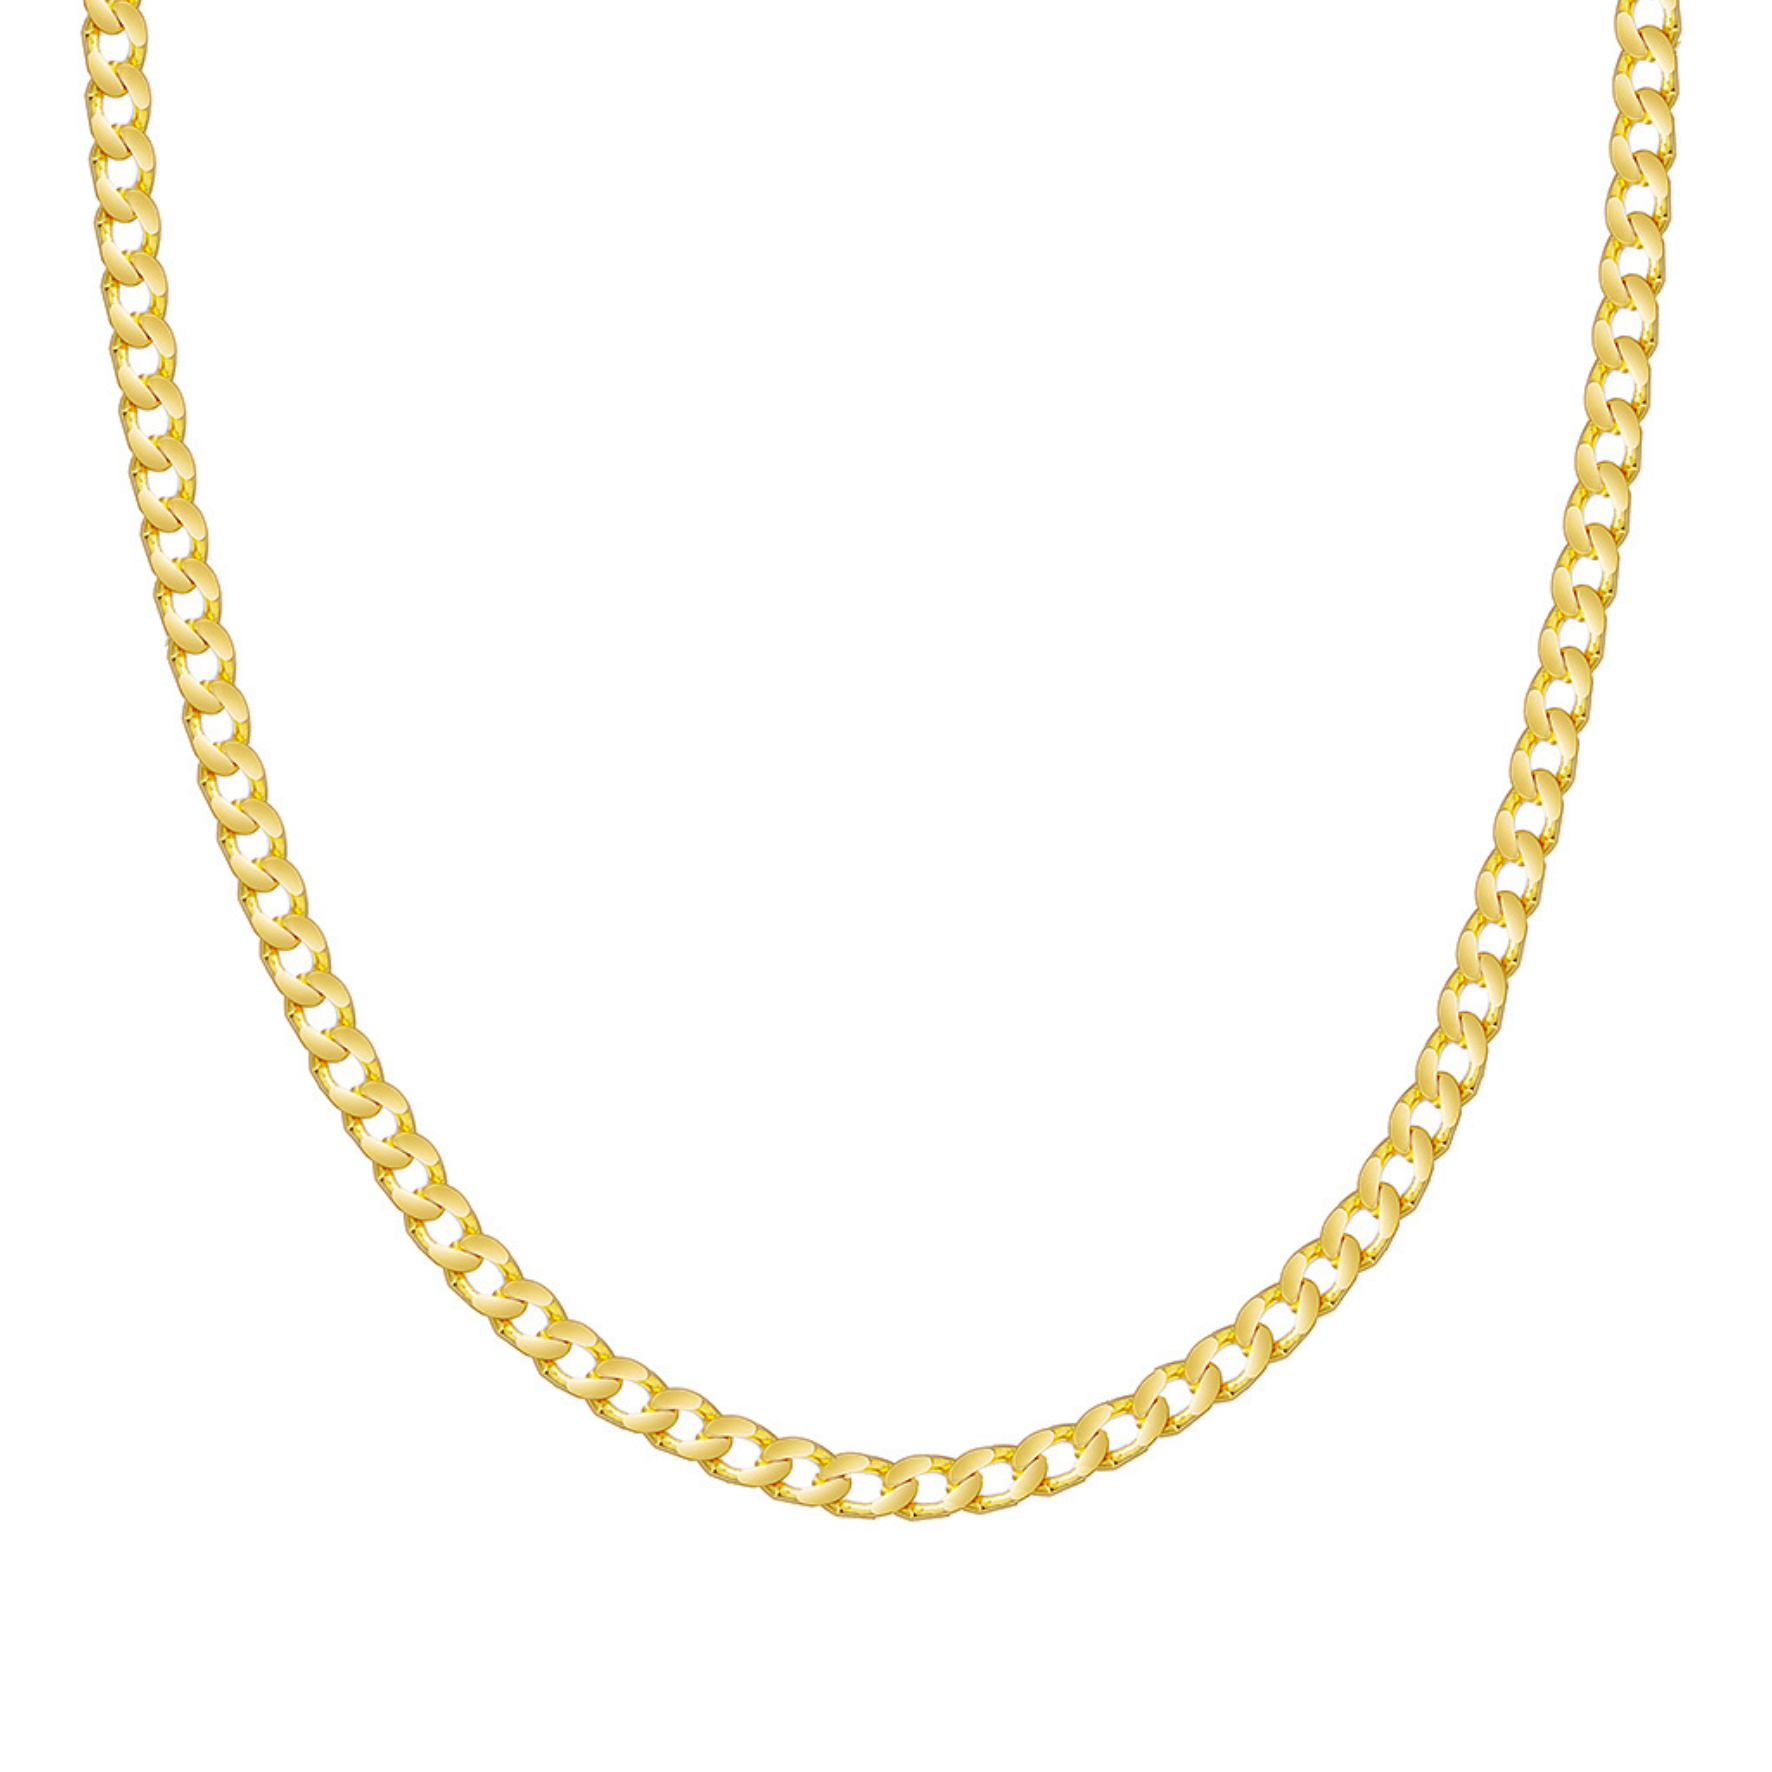 Line Panzer Necklace from A-Hjort Jewellery in Goldplated Silver Sterling 925